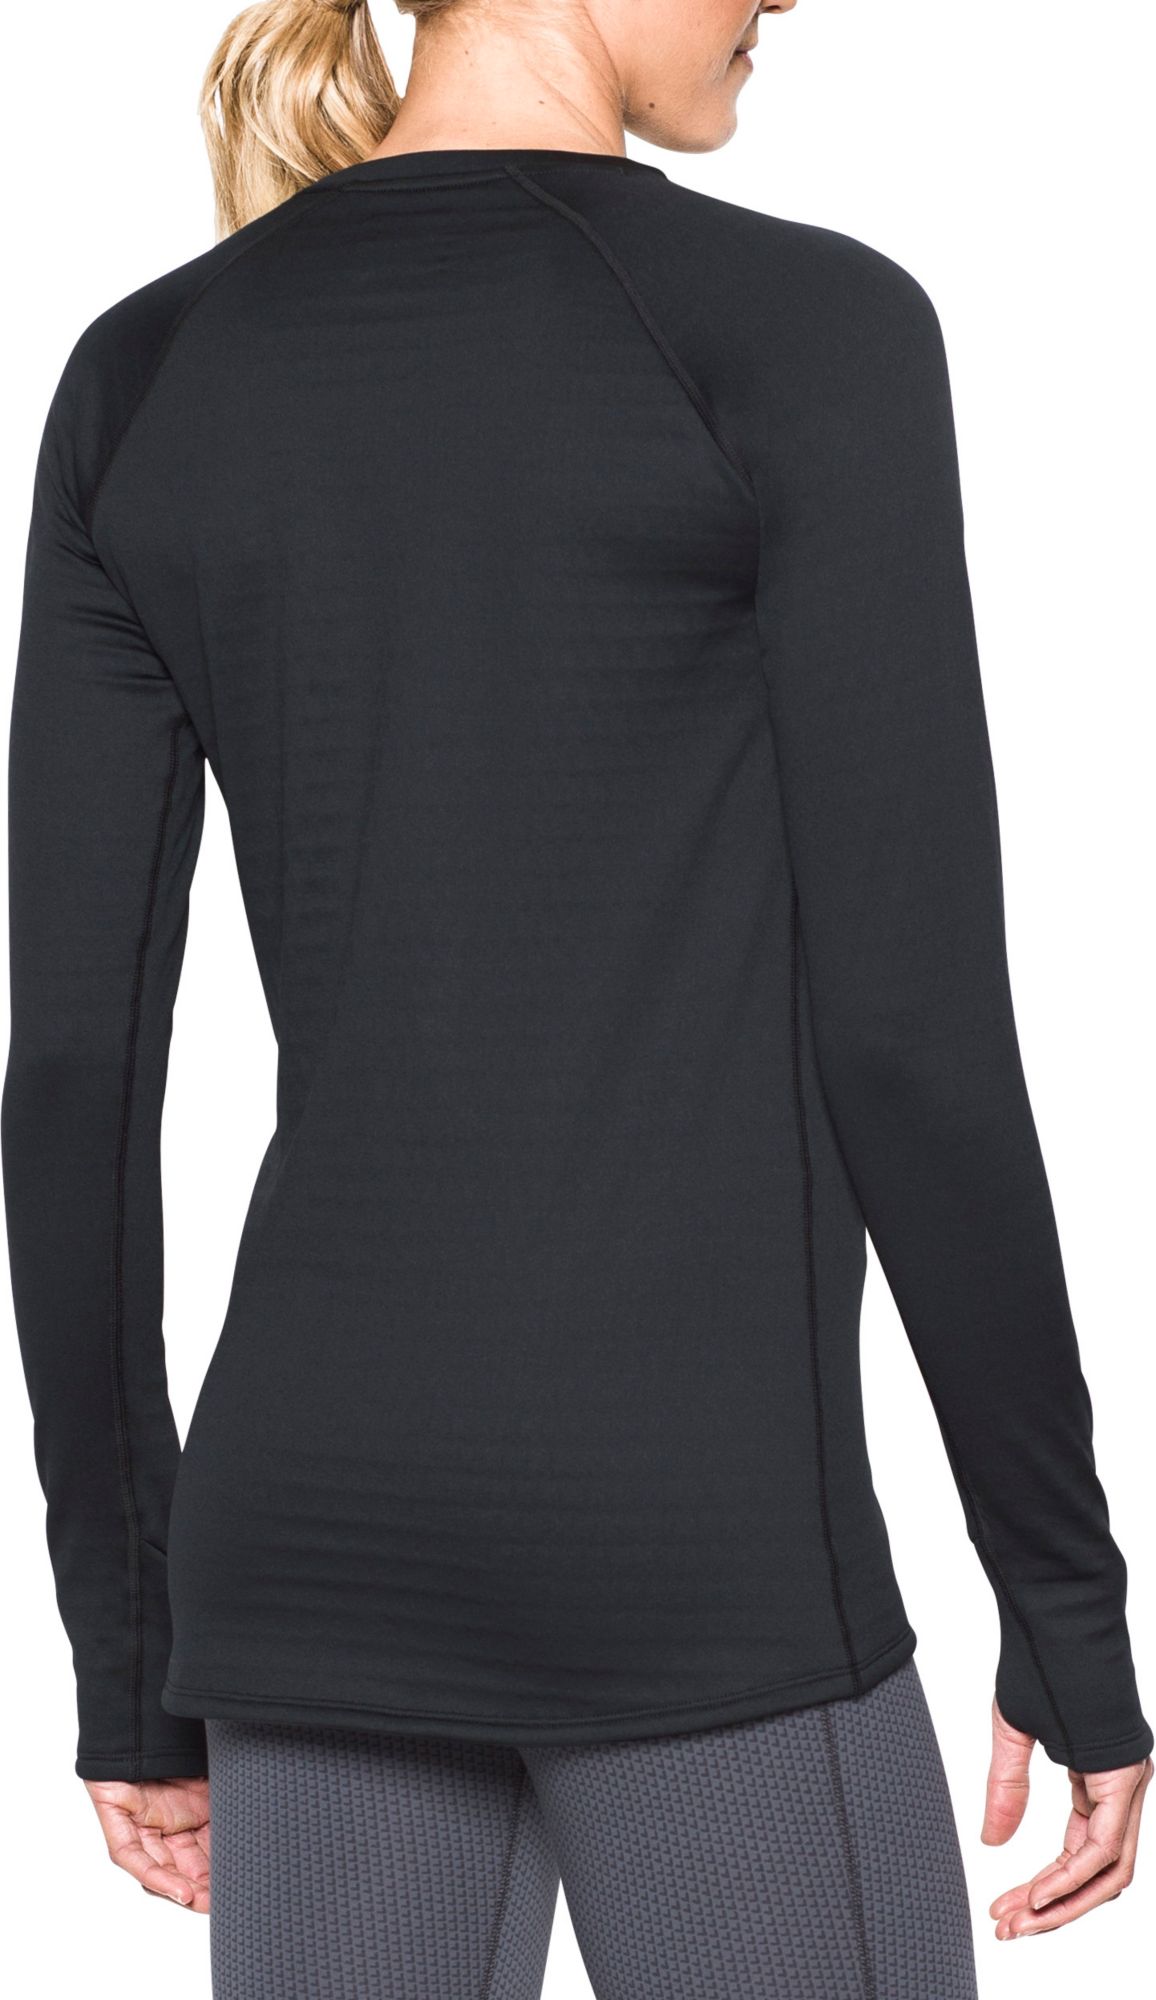 under armour women's thermal top